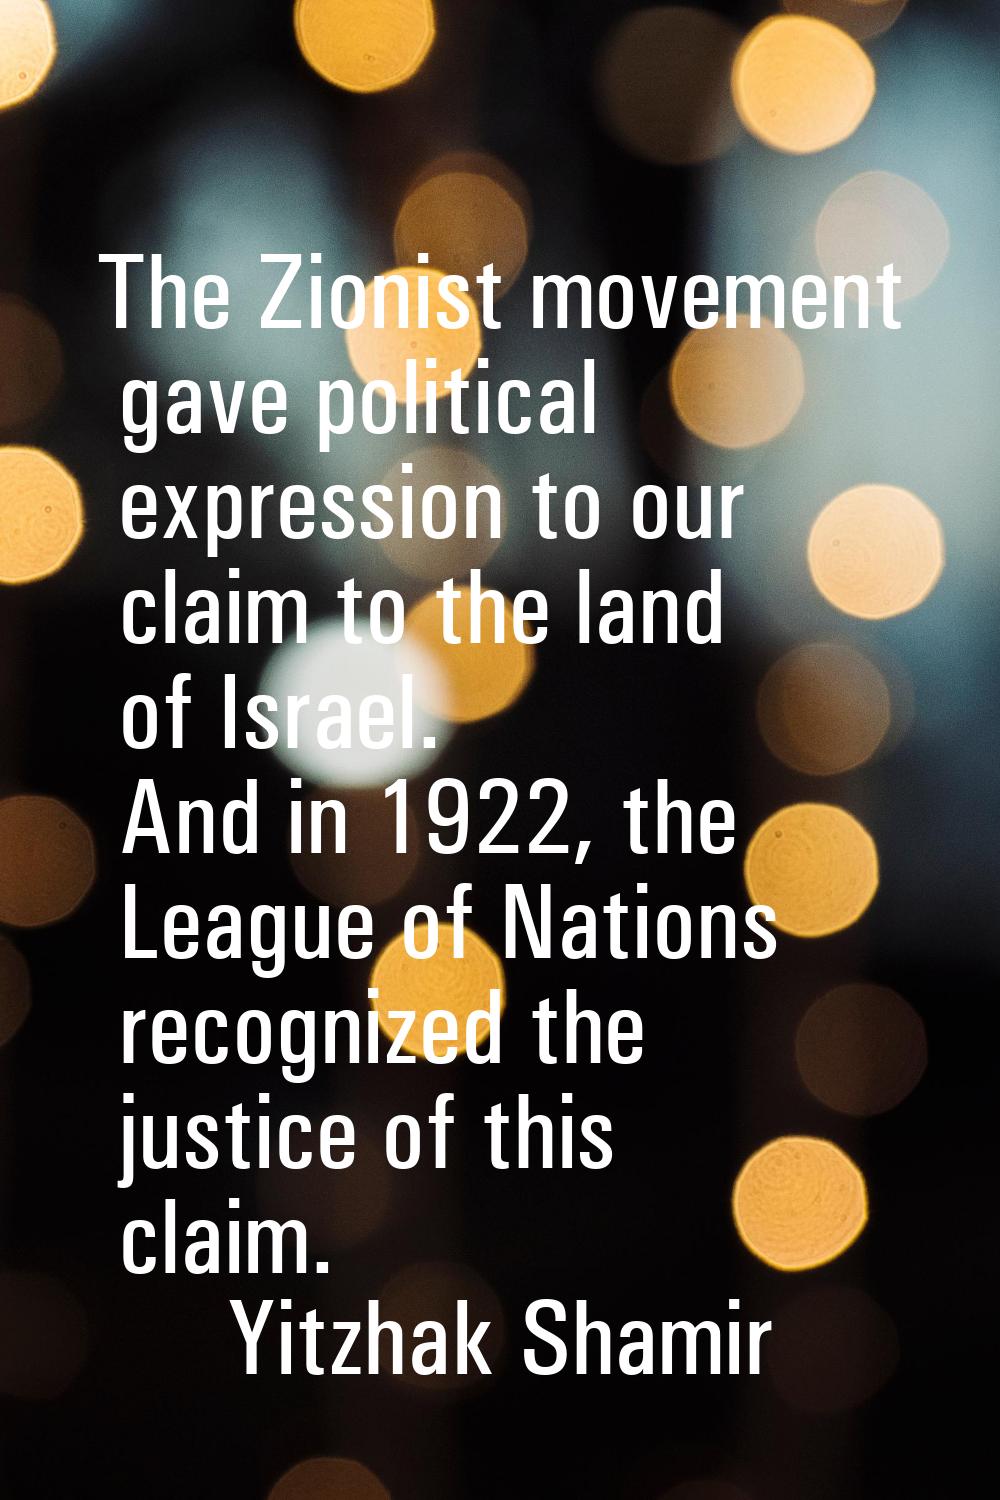 The Zionist movement gave political expression to our claim to the land of Israel. And in 1922, the